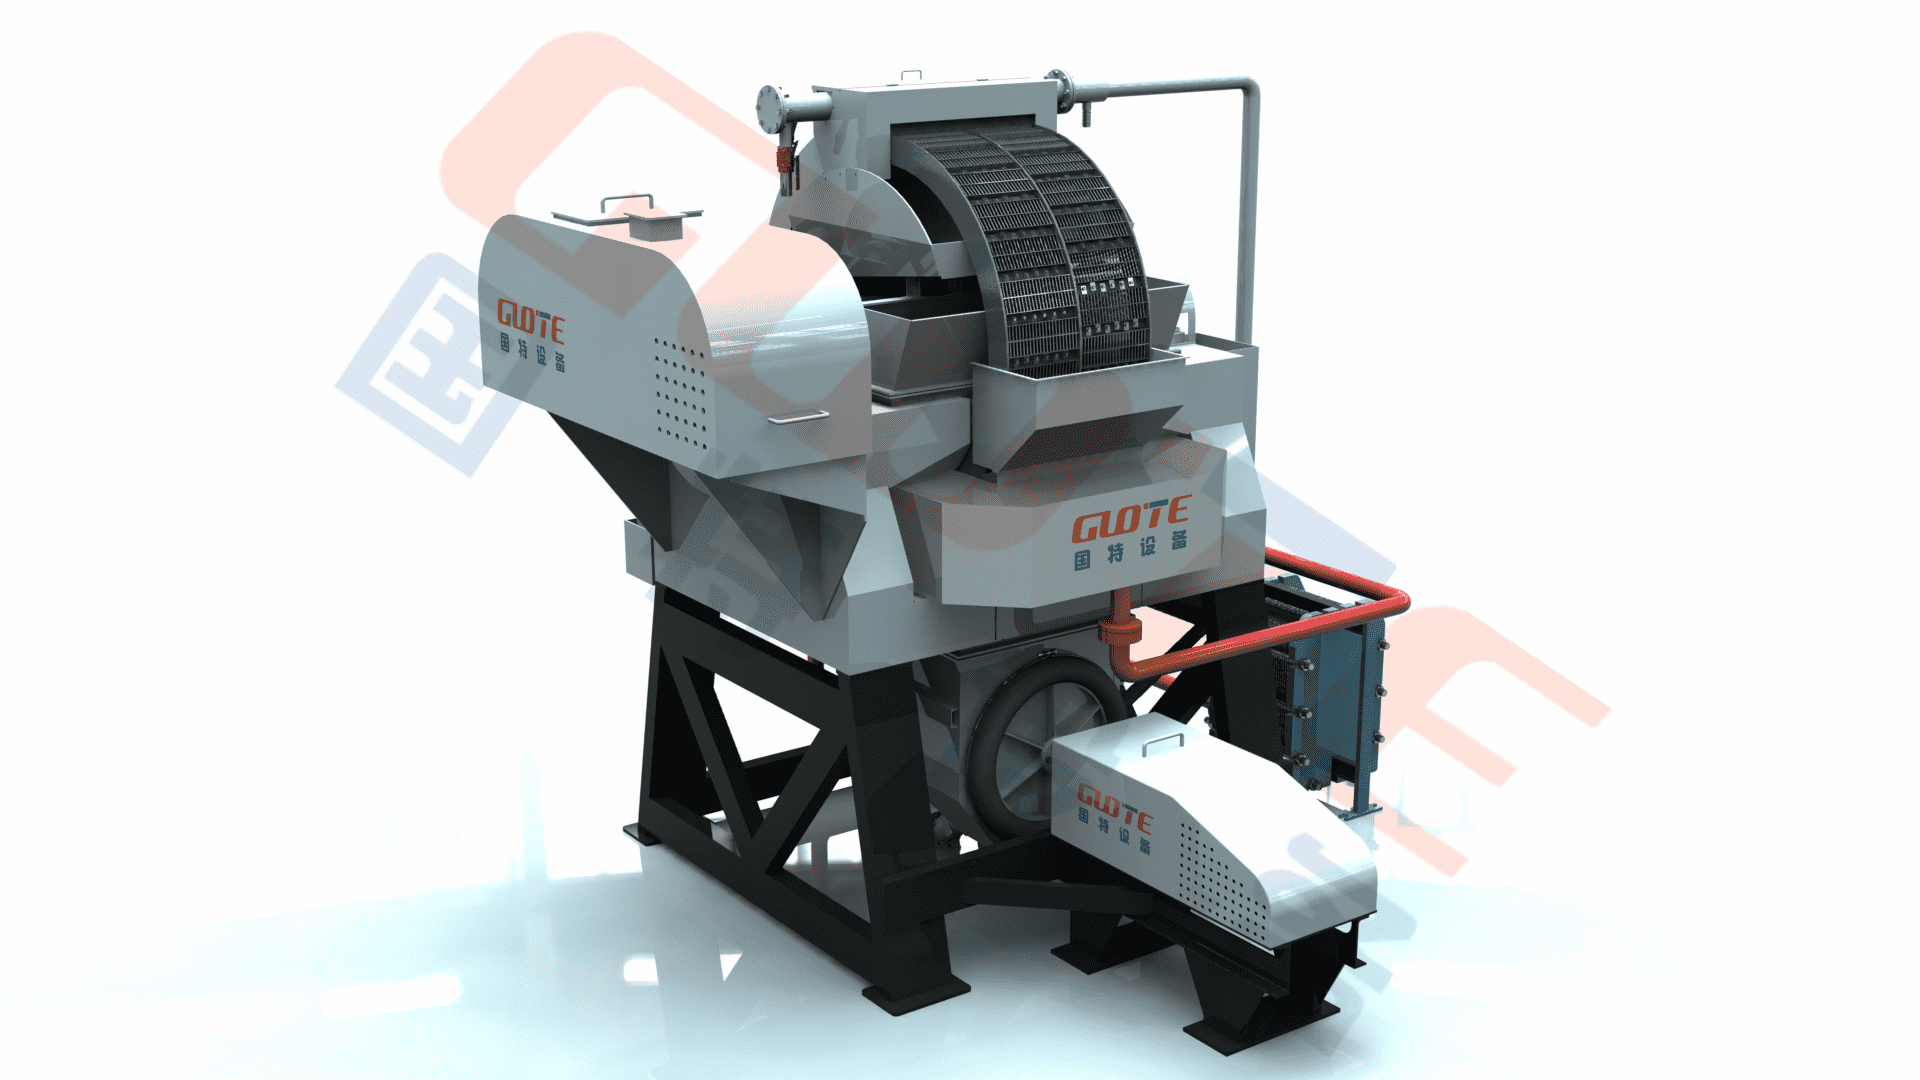 One of Hottest for Strong Magnetic Magnetic Separator - Reasonable price China Good Quality Wet Magnetic Separator From Jxsc Mining Machinery Factory – Guote